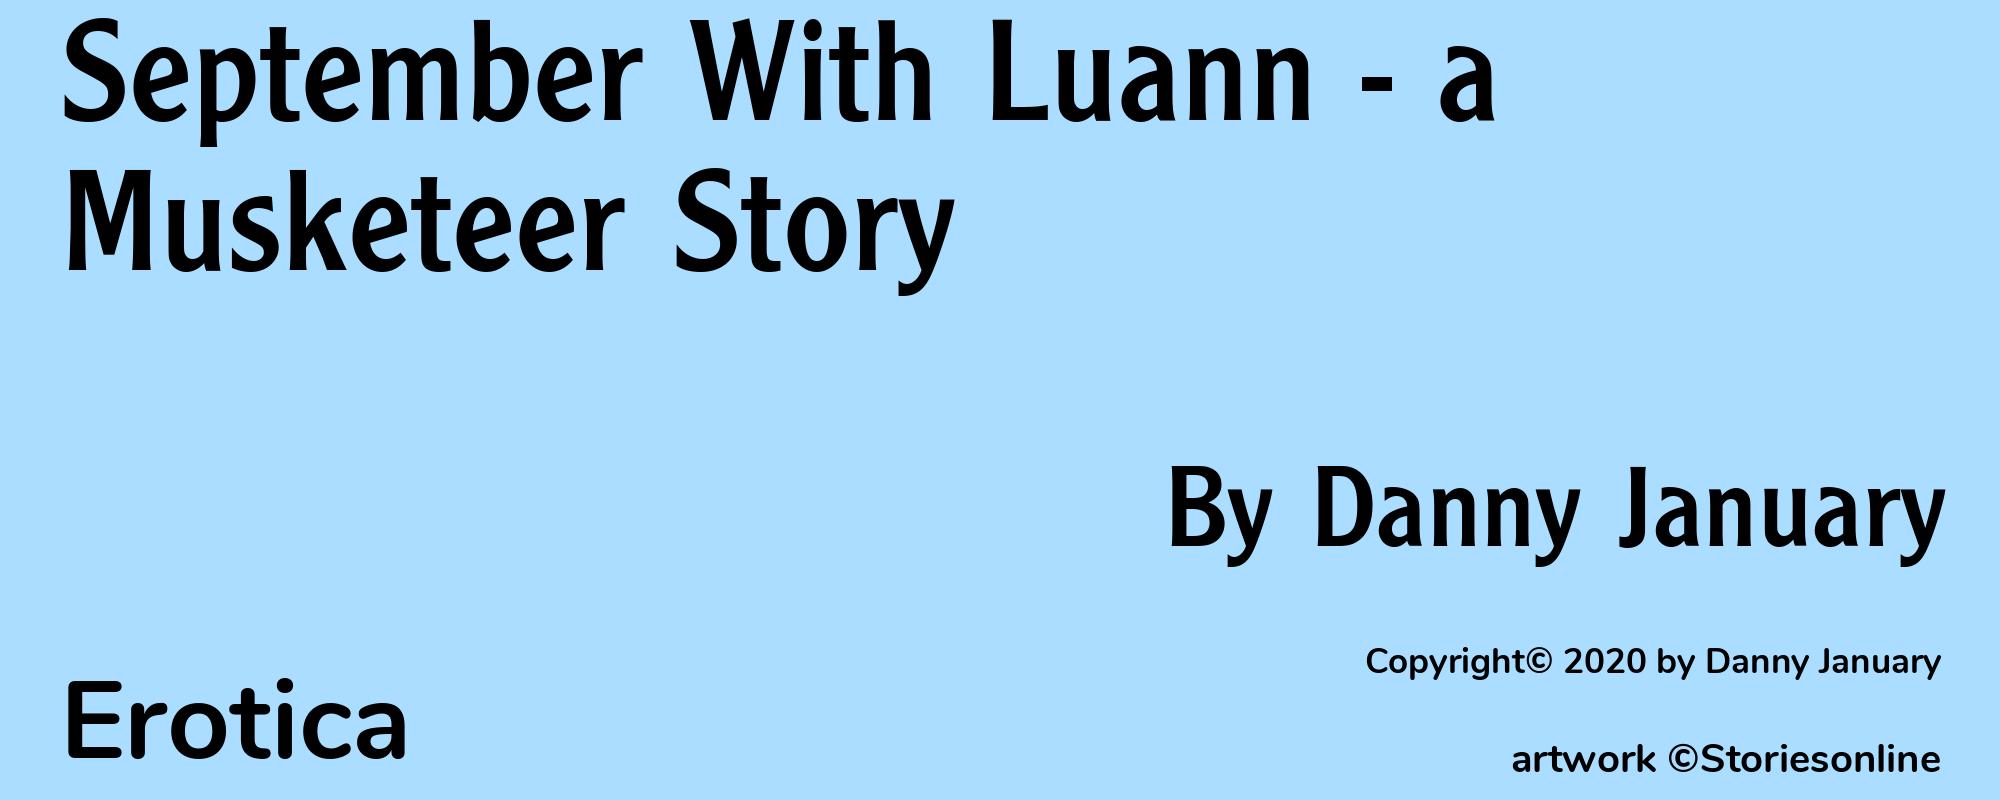 September With Luann - a Musketeer Story - Cover